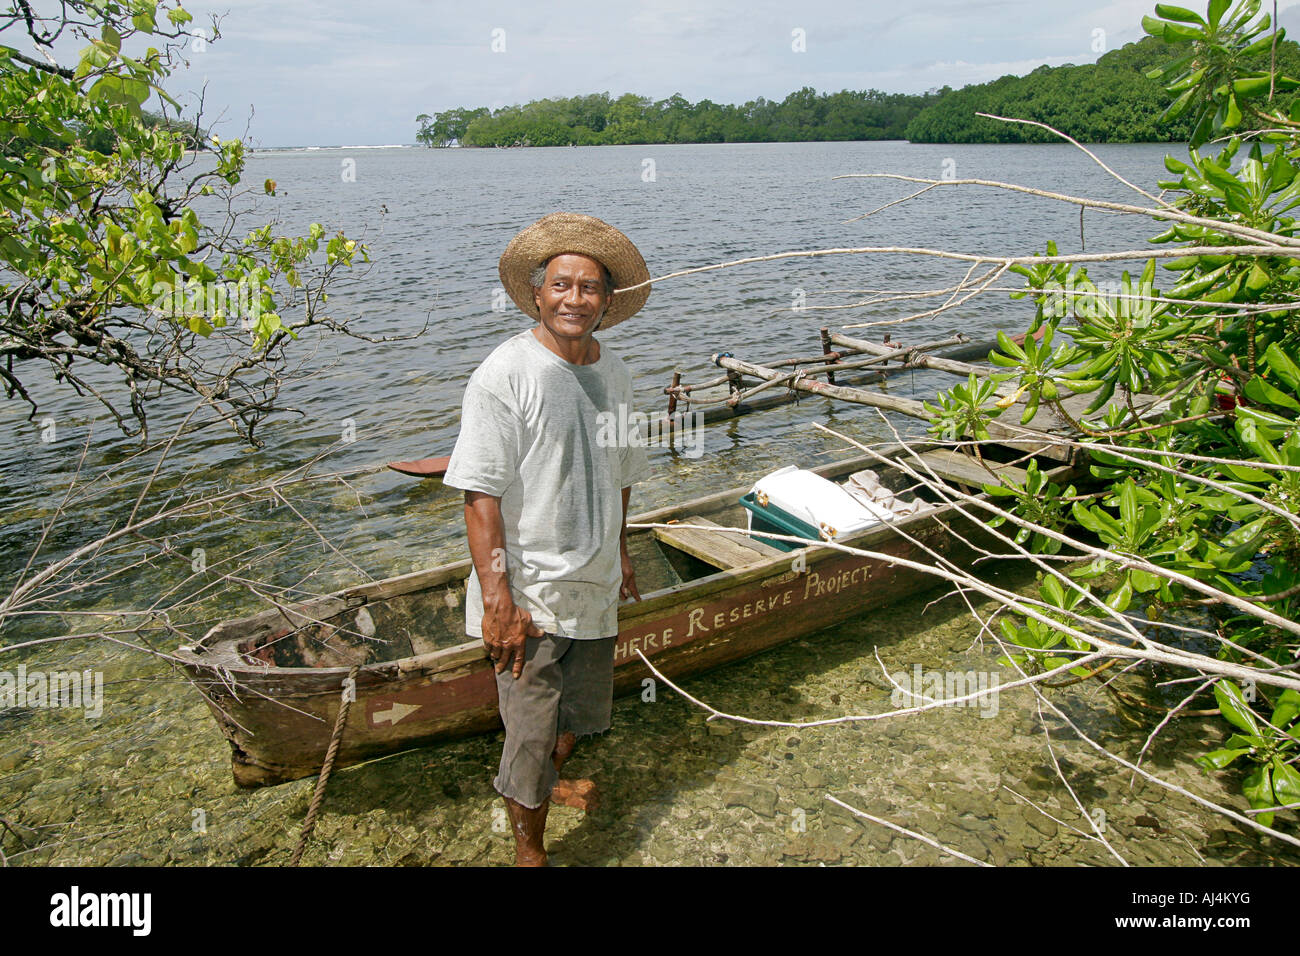 Local native man 62 years old stands in tropical jungle and talks about traditional uses of mangrove plants in Micronesia Stock Photo